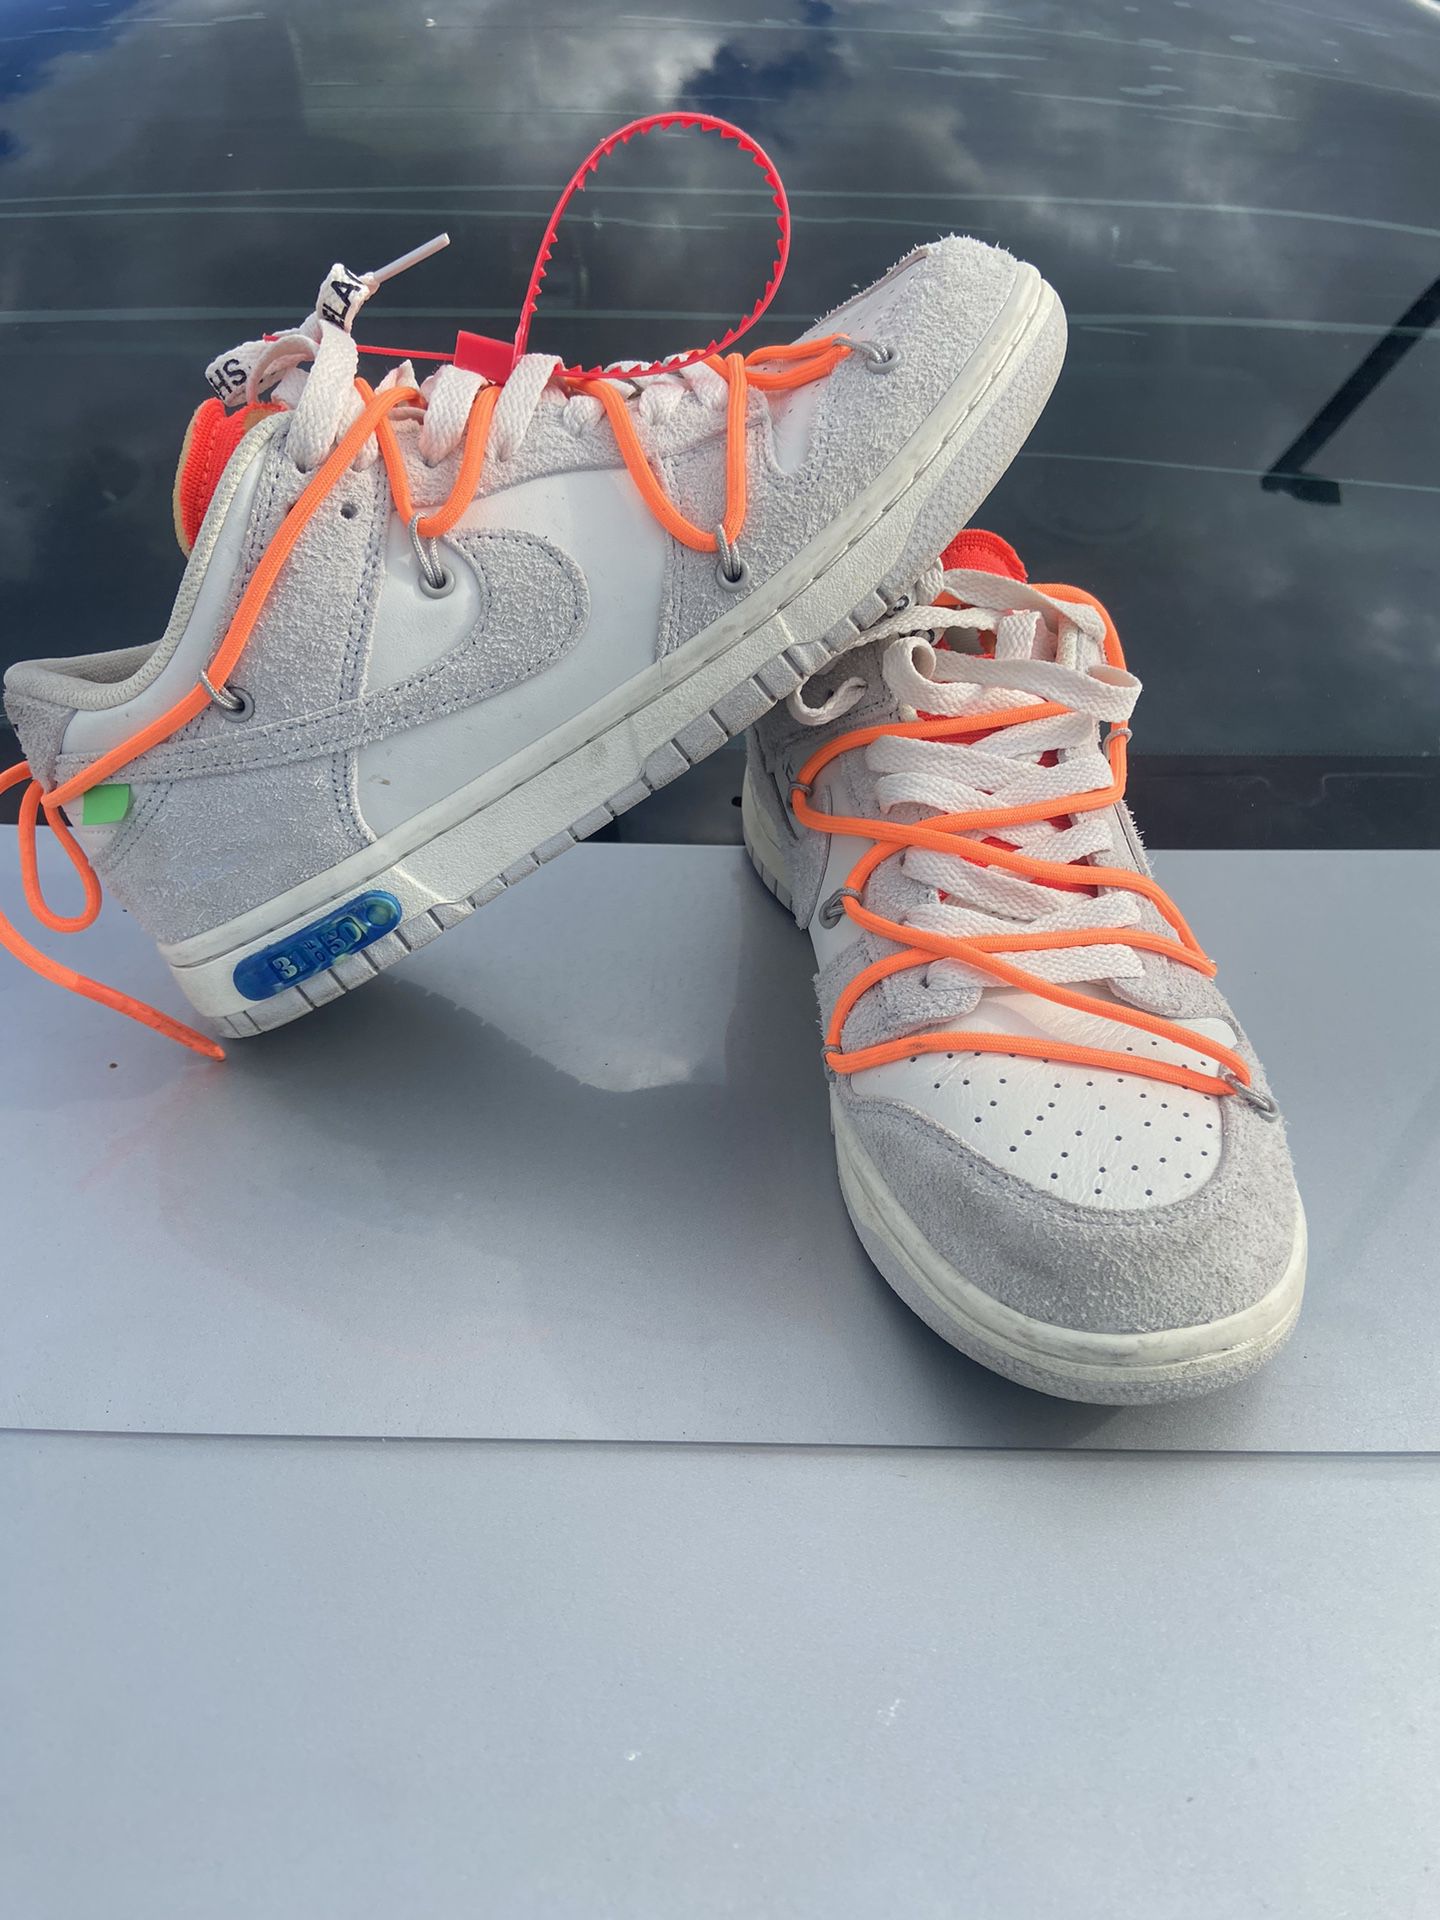 Off-White x Dunk Low Lot 31 of 50